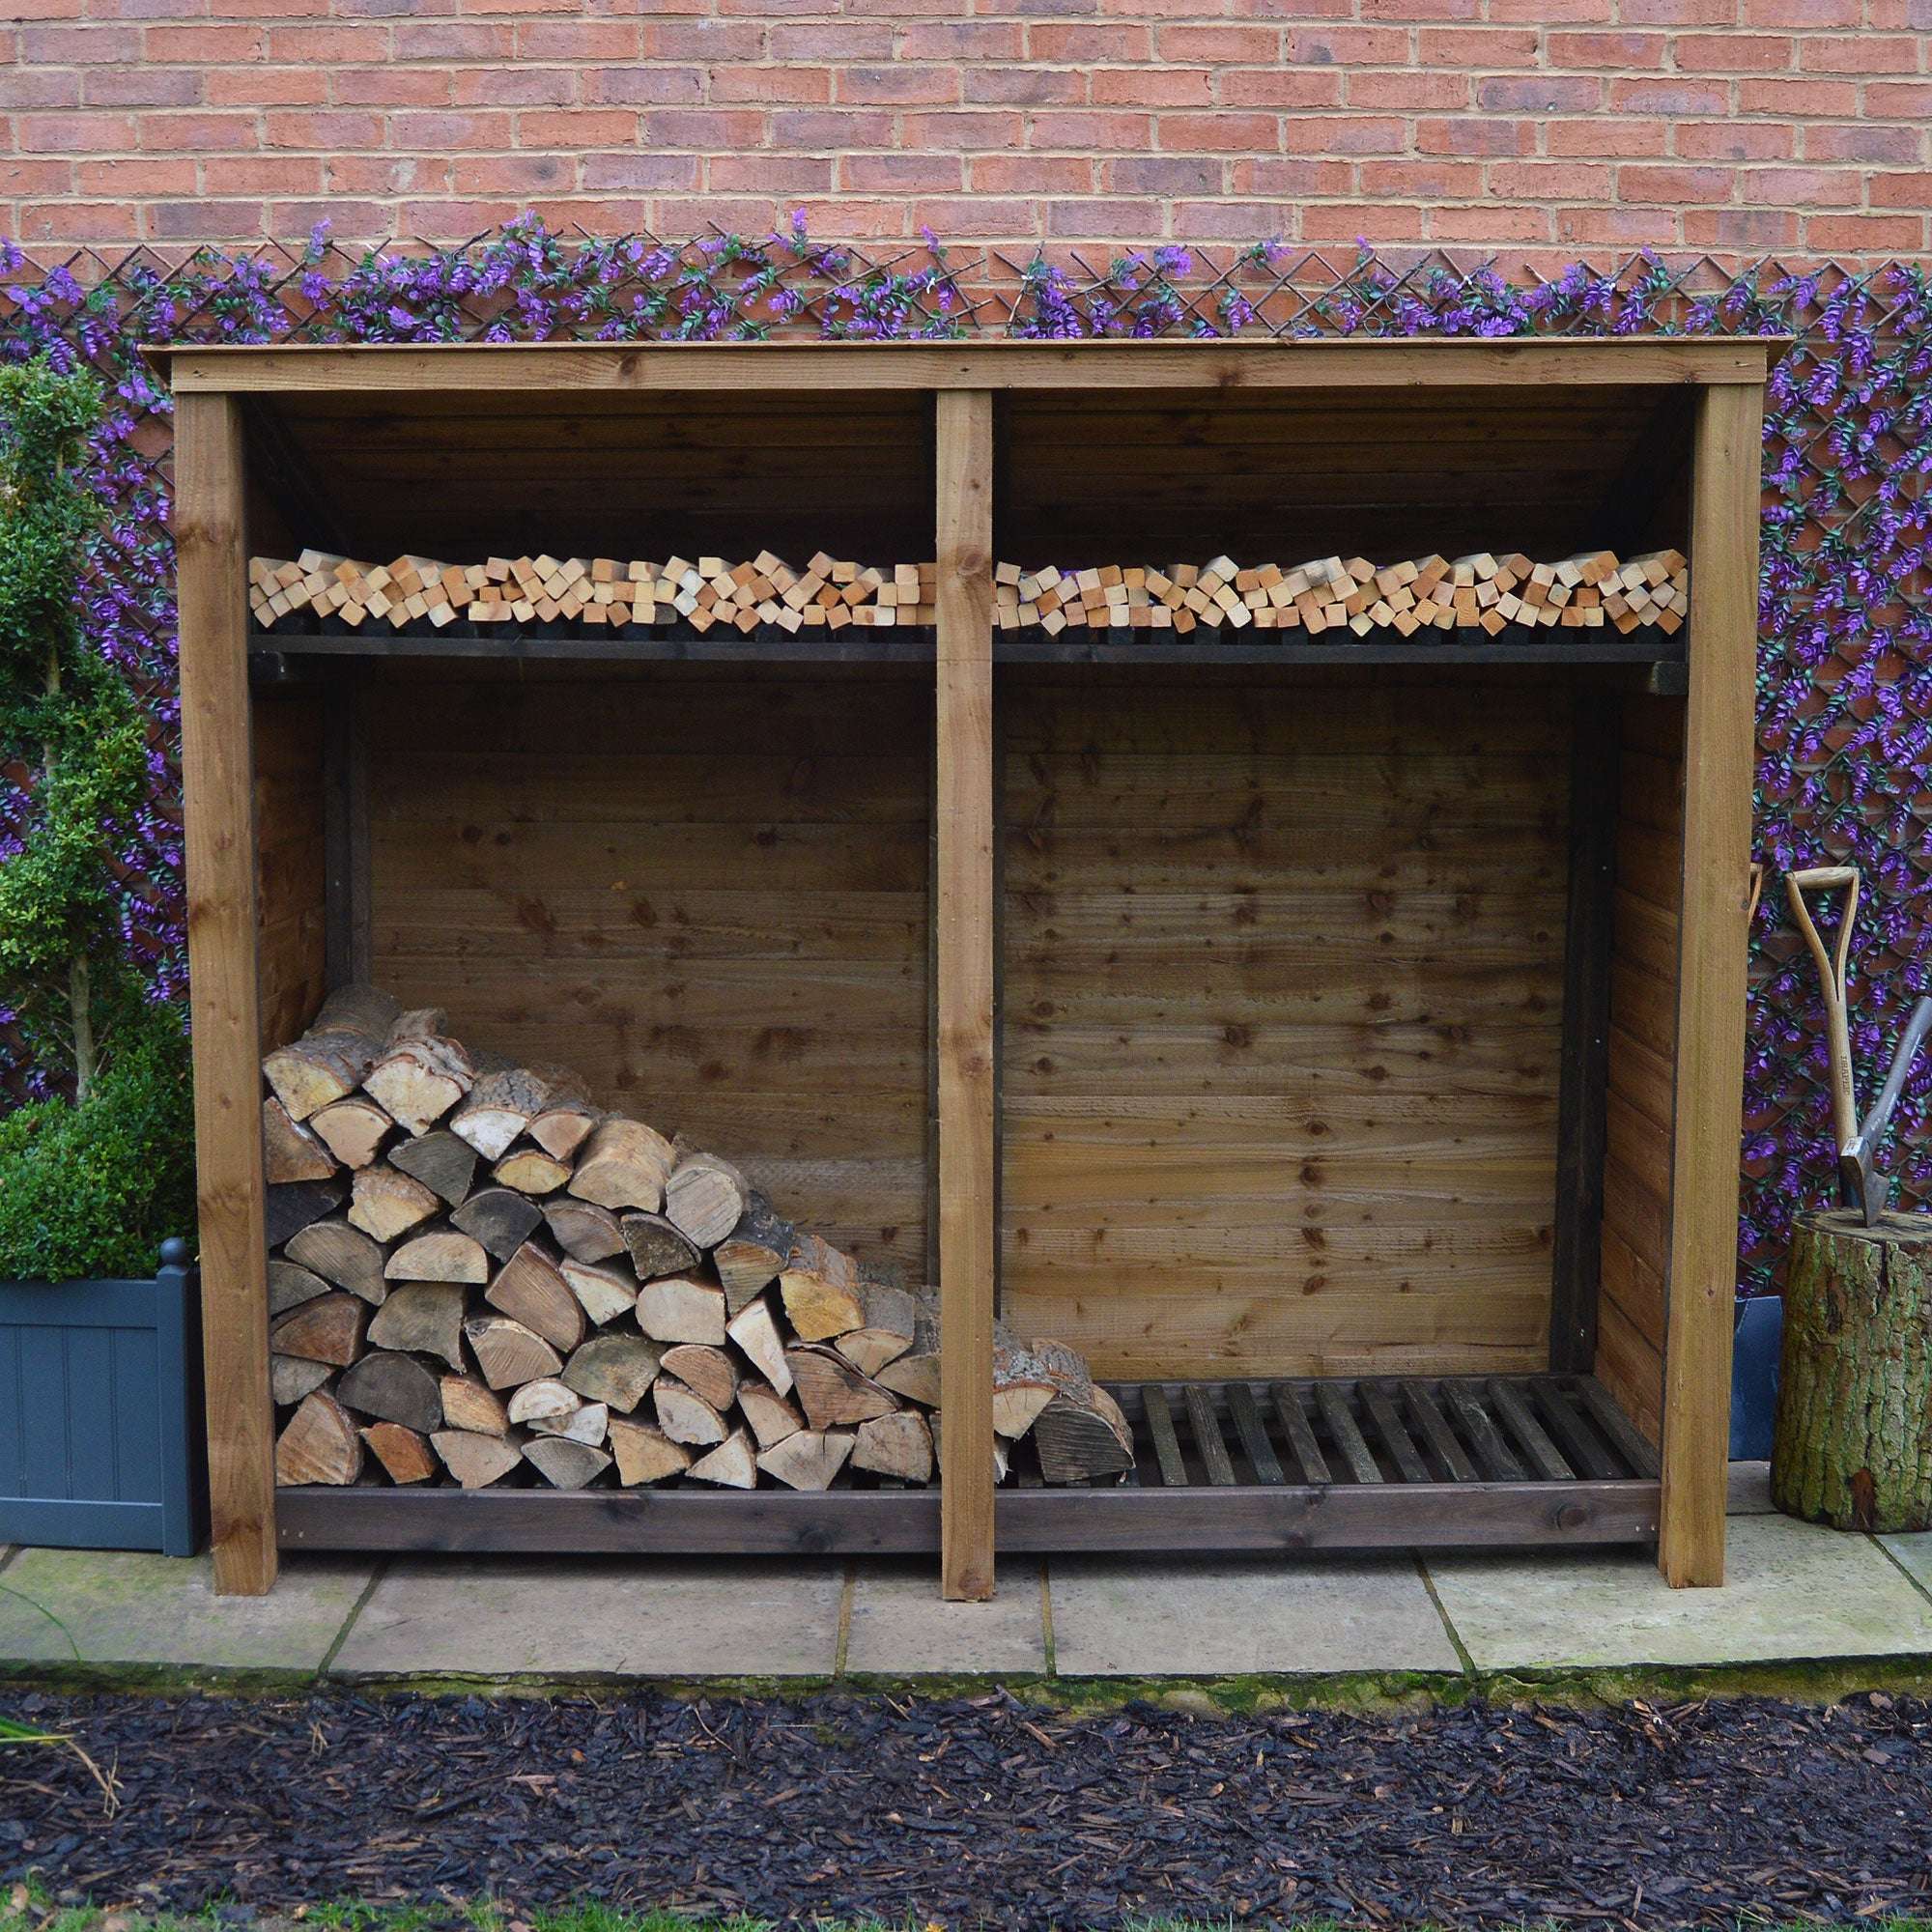 Exceptional Garden:Rutland County Normanton Log Store with Kindling Shelf - 6ft